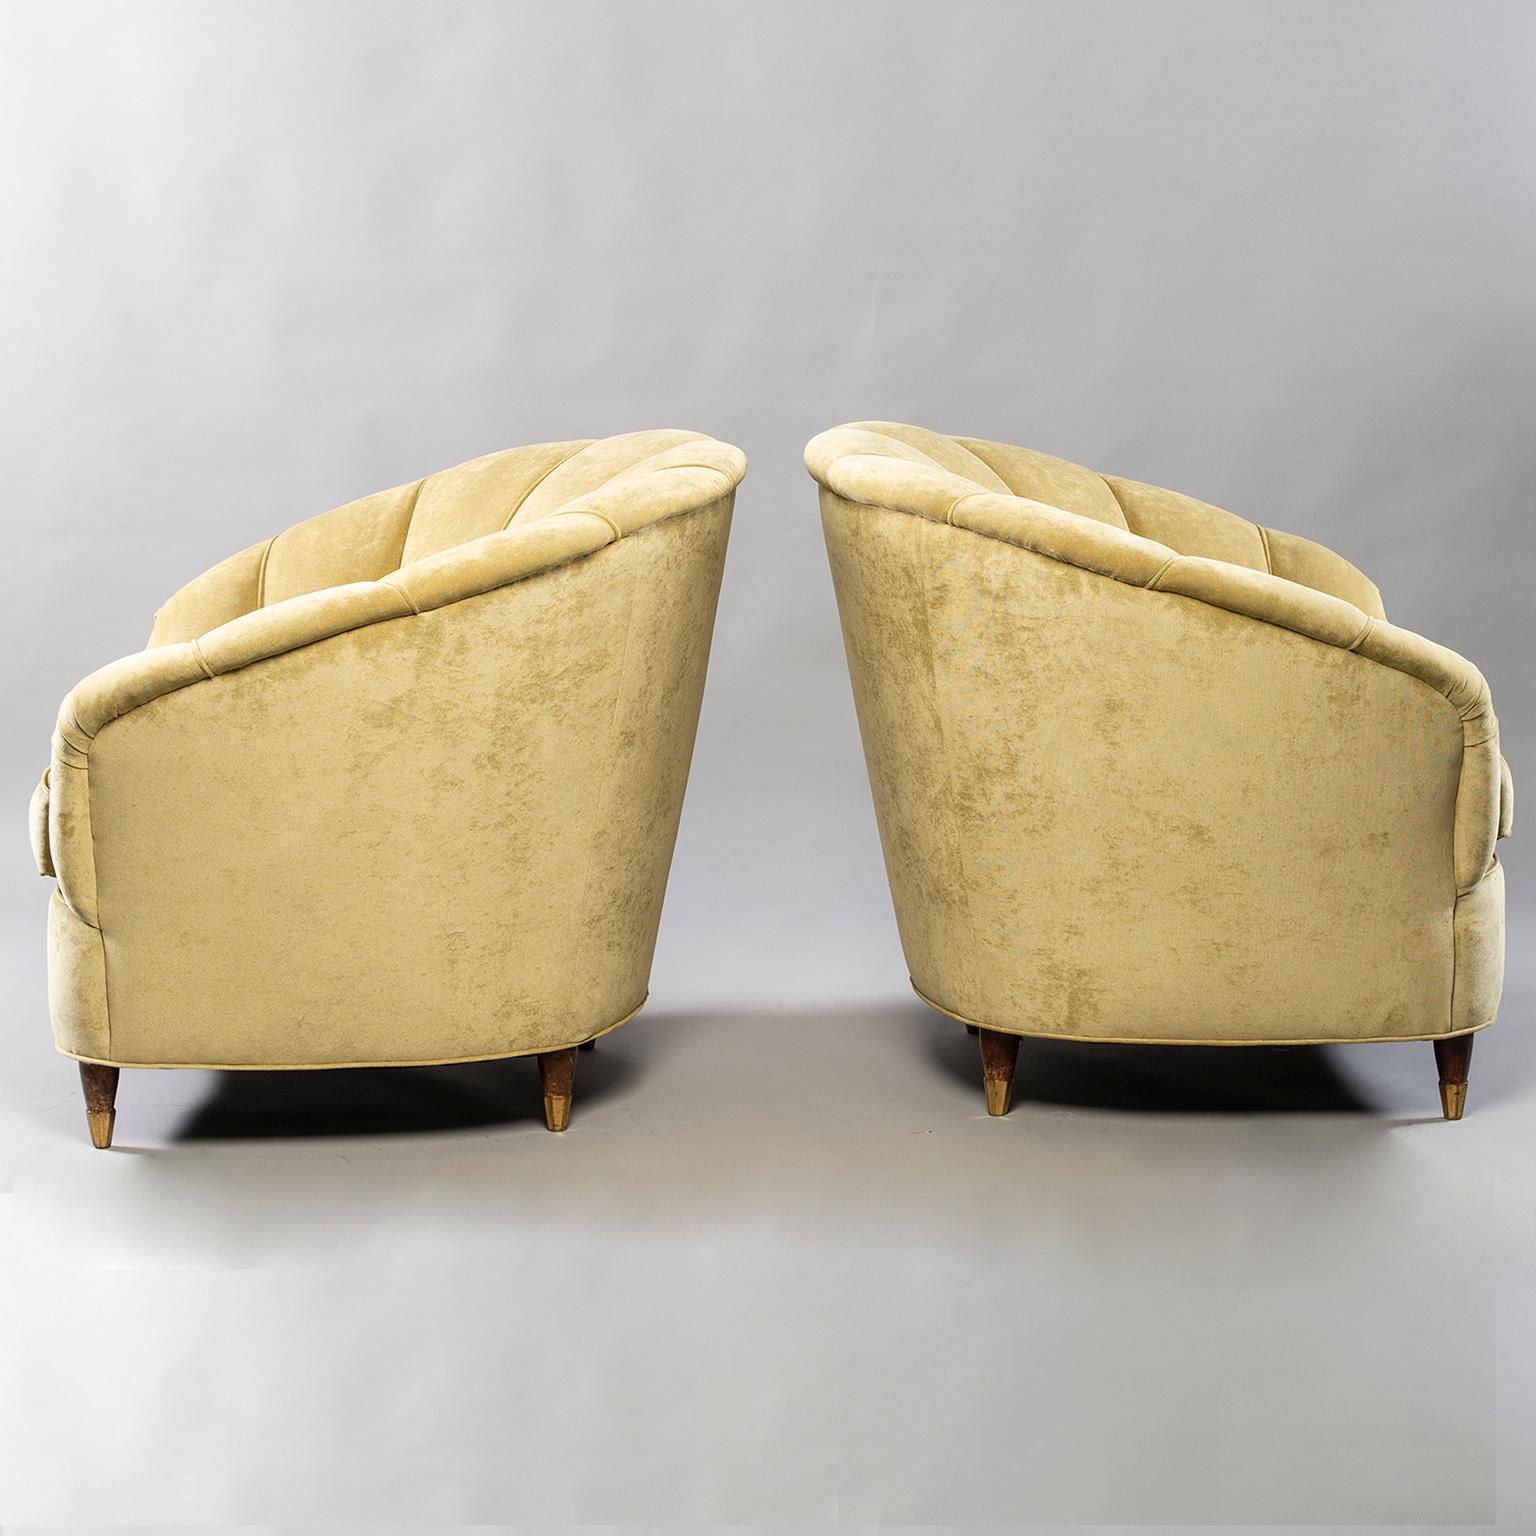 Brass Coquille Form Sofa and Pair of Chairs Attributed to Paolo Buffa